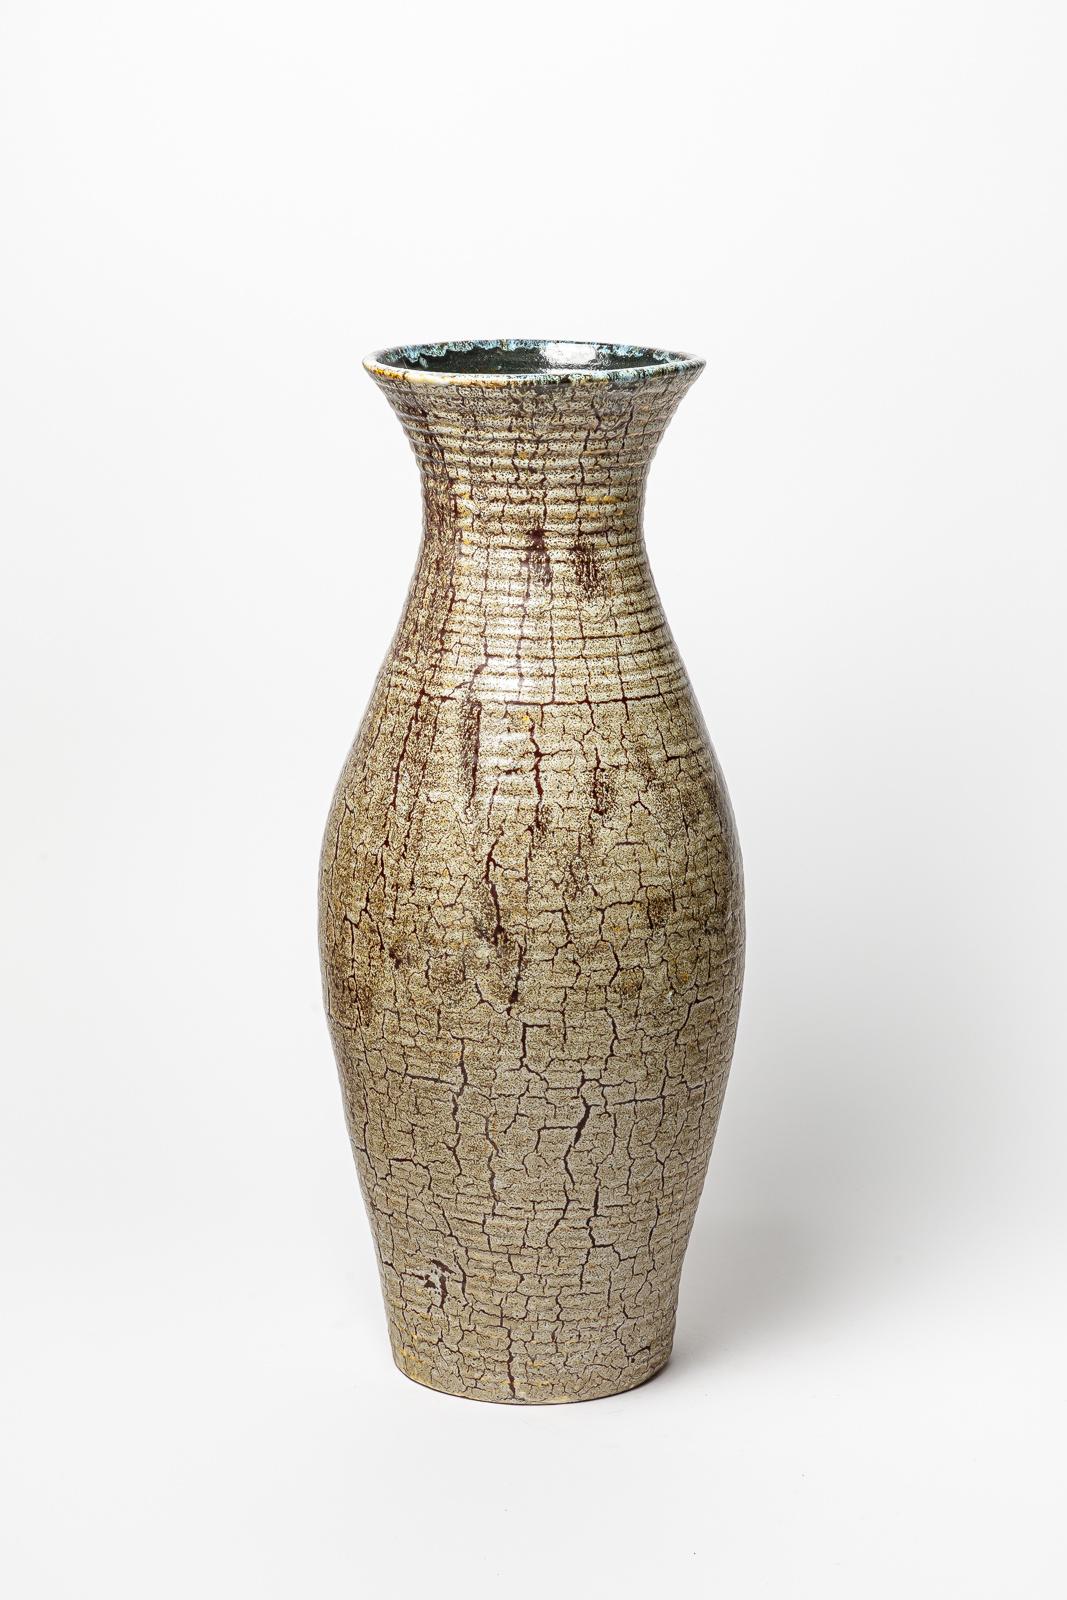 Brown glazed stoneware vase by Accolay.
Artist signature under the base. Circa 1960-1970. 
H : 21.6’ x 8.3’ inches.
